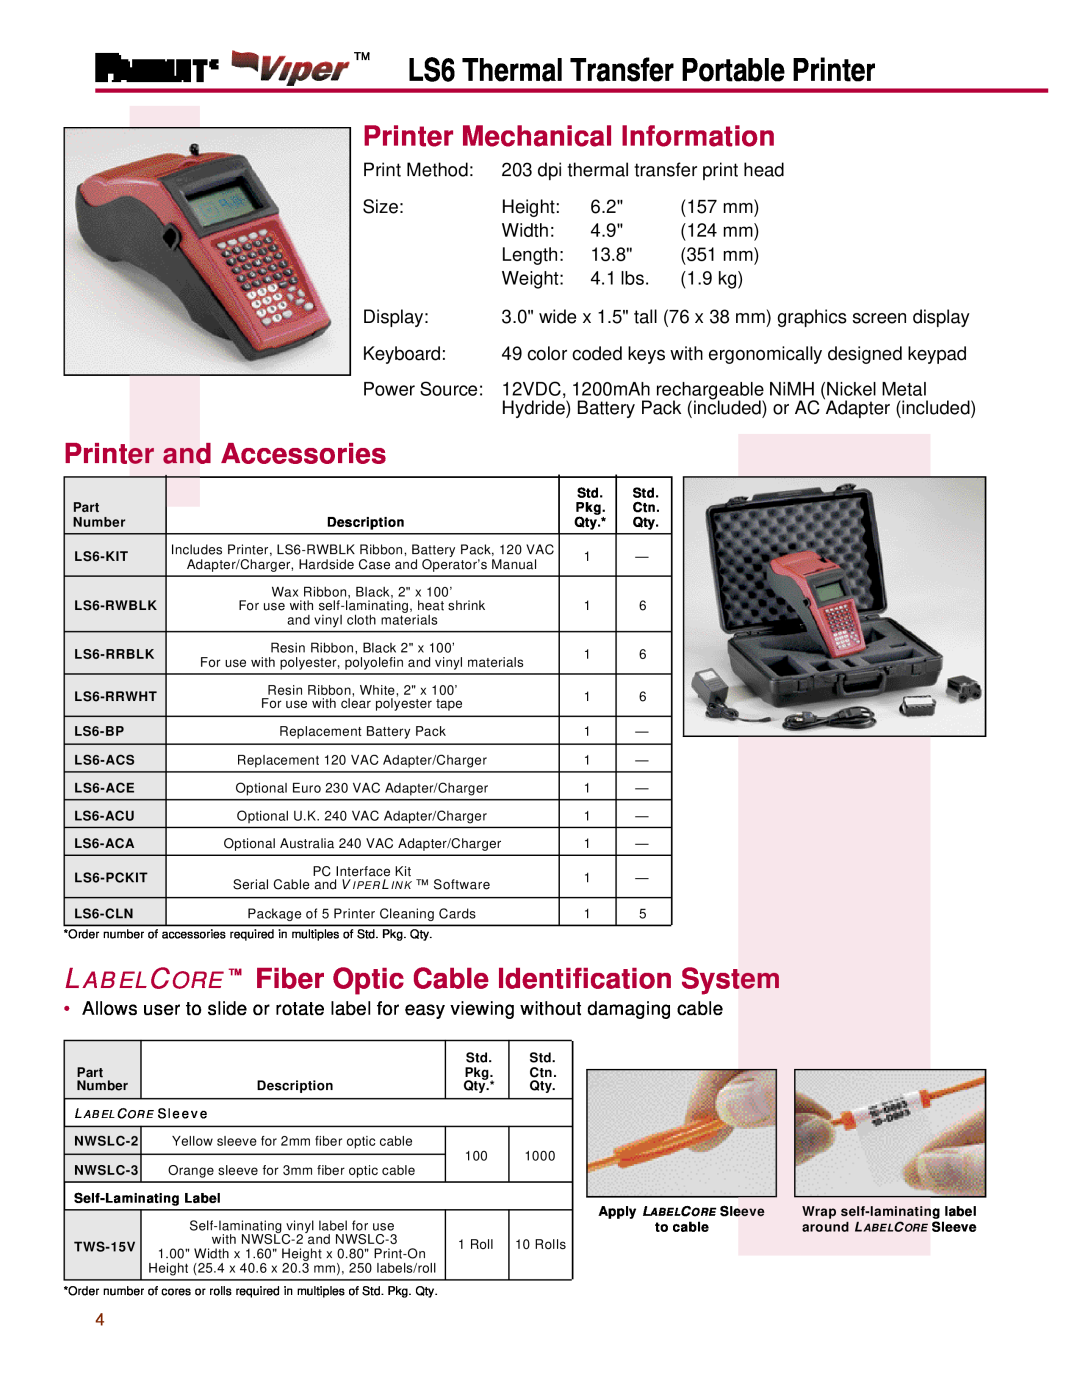 Panduit LS6 Printer Mechanical Information, Printer and Accessories, LABELCORE Fiber Optic Cable Identification System 